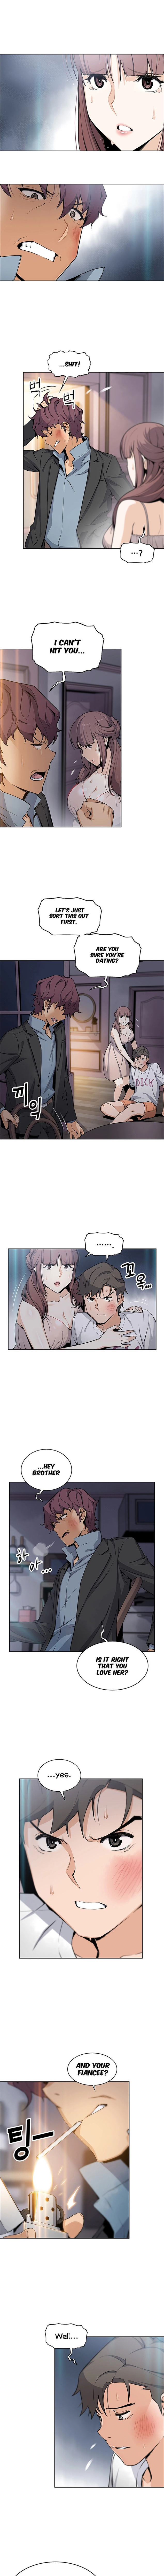 Housekeeper Manhwa - Chapter 38 Page 2